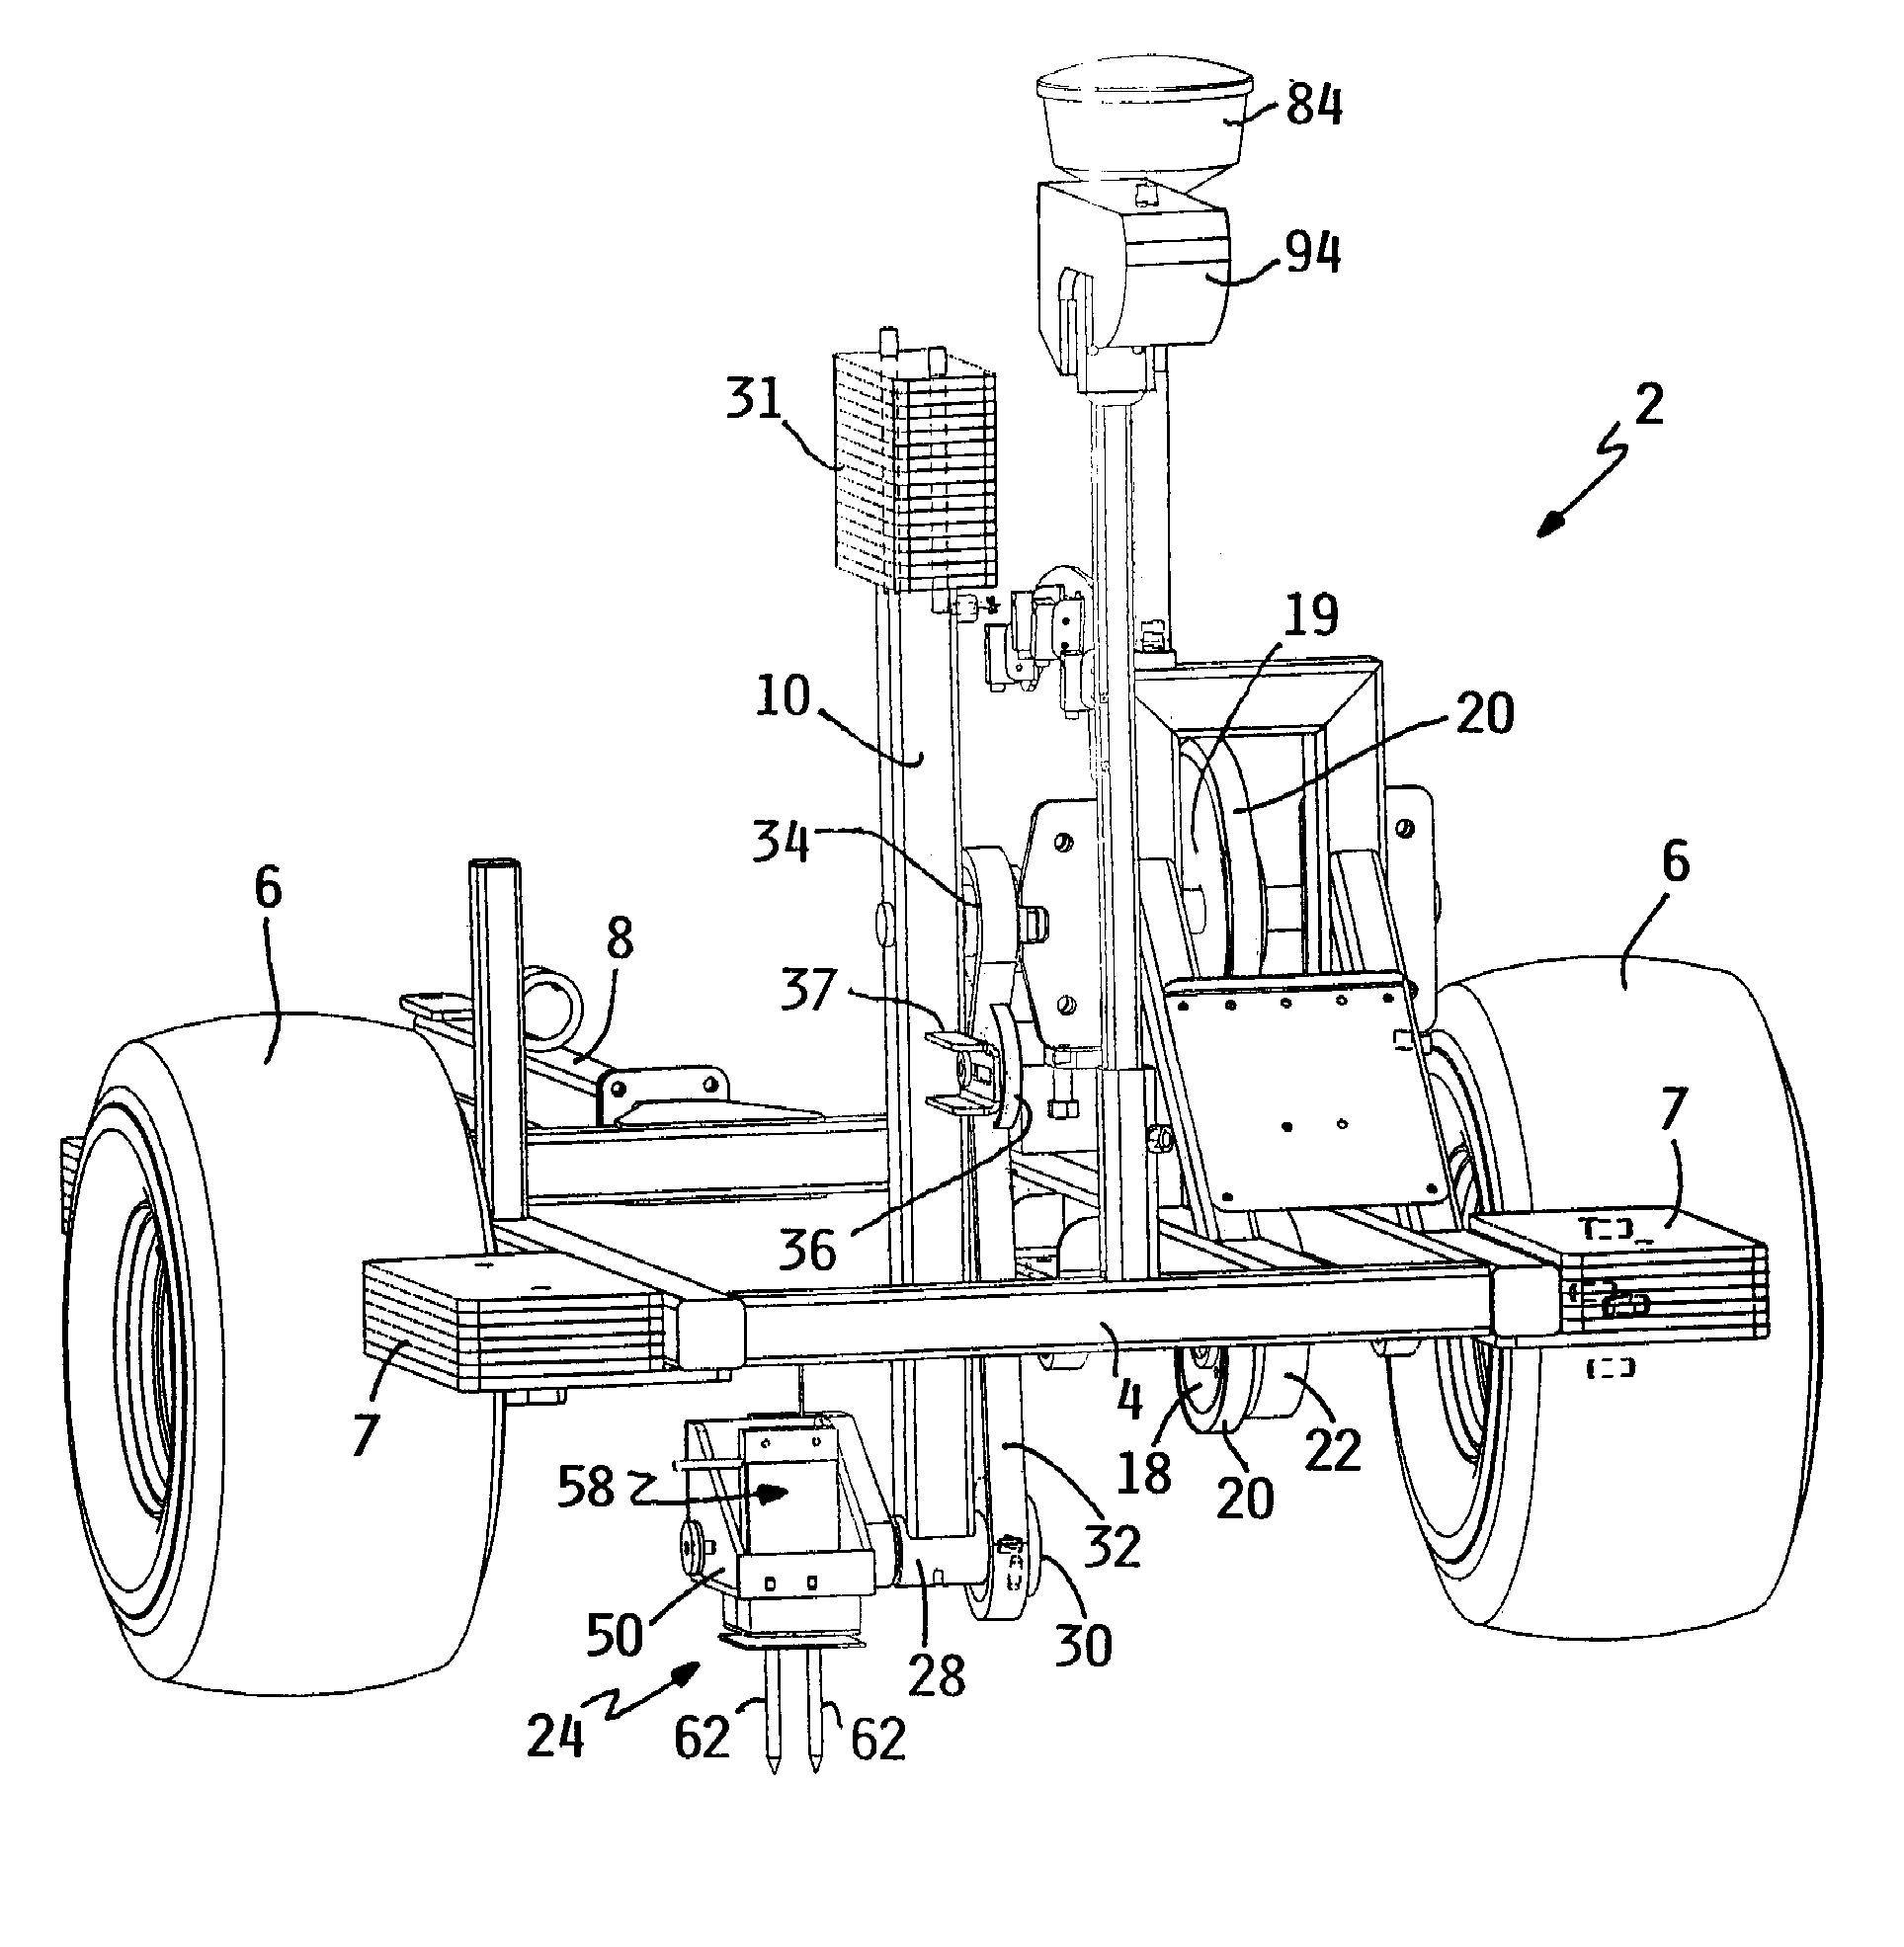 Mobile turf instrument apparatus having droppable hammer type accelerometer carried on rotating arm